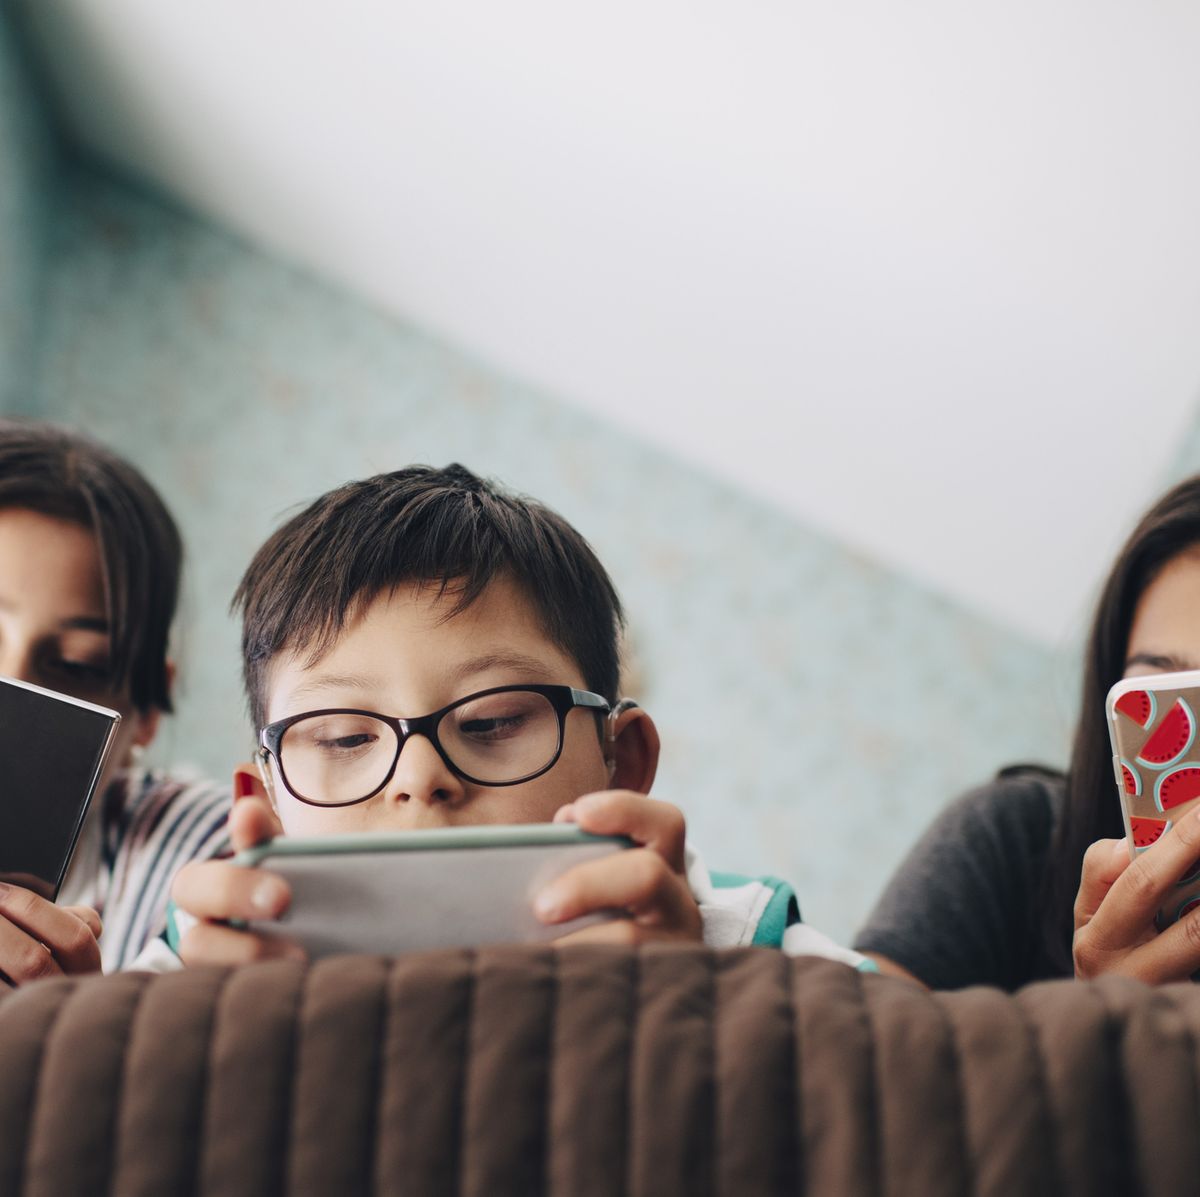 The 5 things you must do before giving a child a smartphone